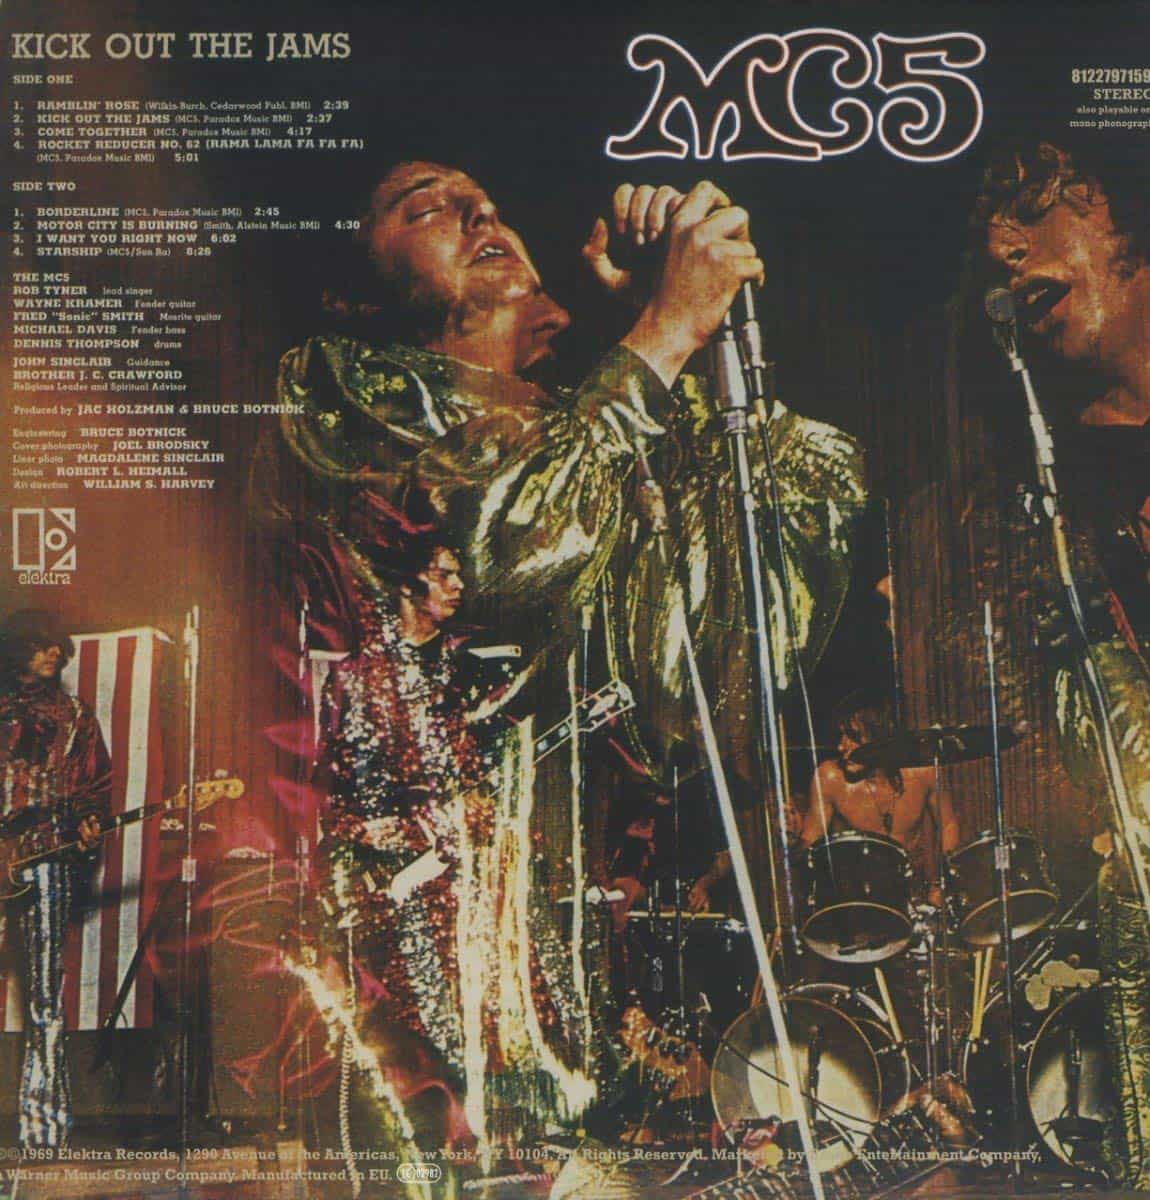 Image result for mc5 kick out the jams